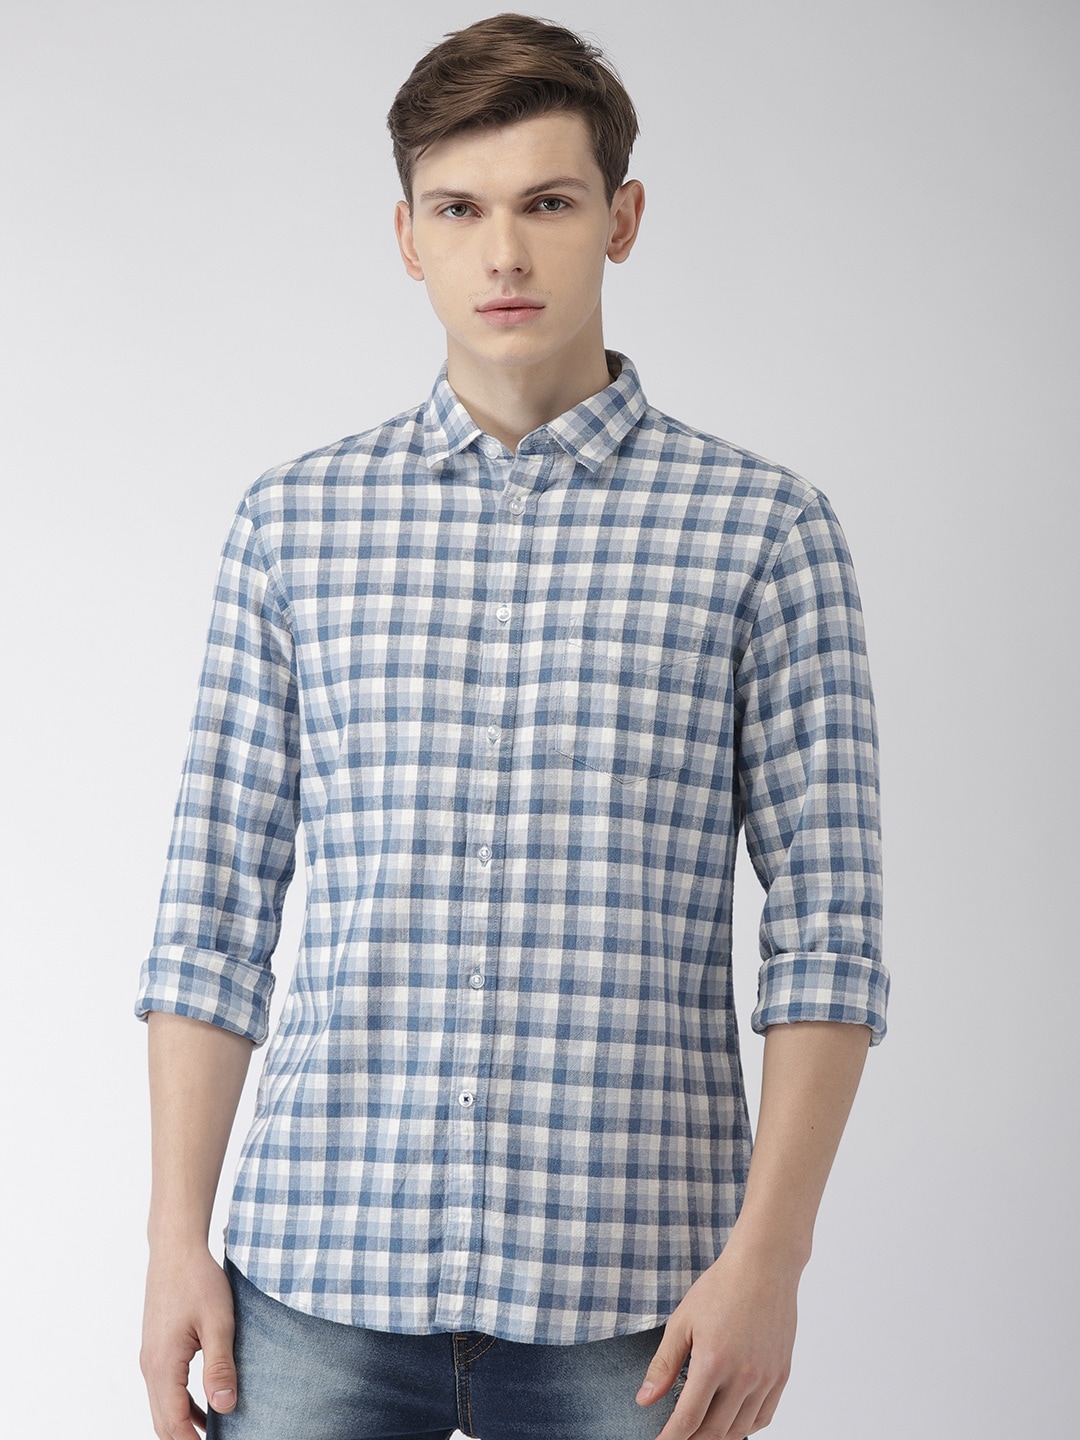 Buy Celio Men Blue & White Checked Casual Sustainable Shirt - Shirts ...